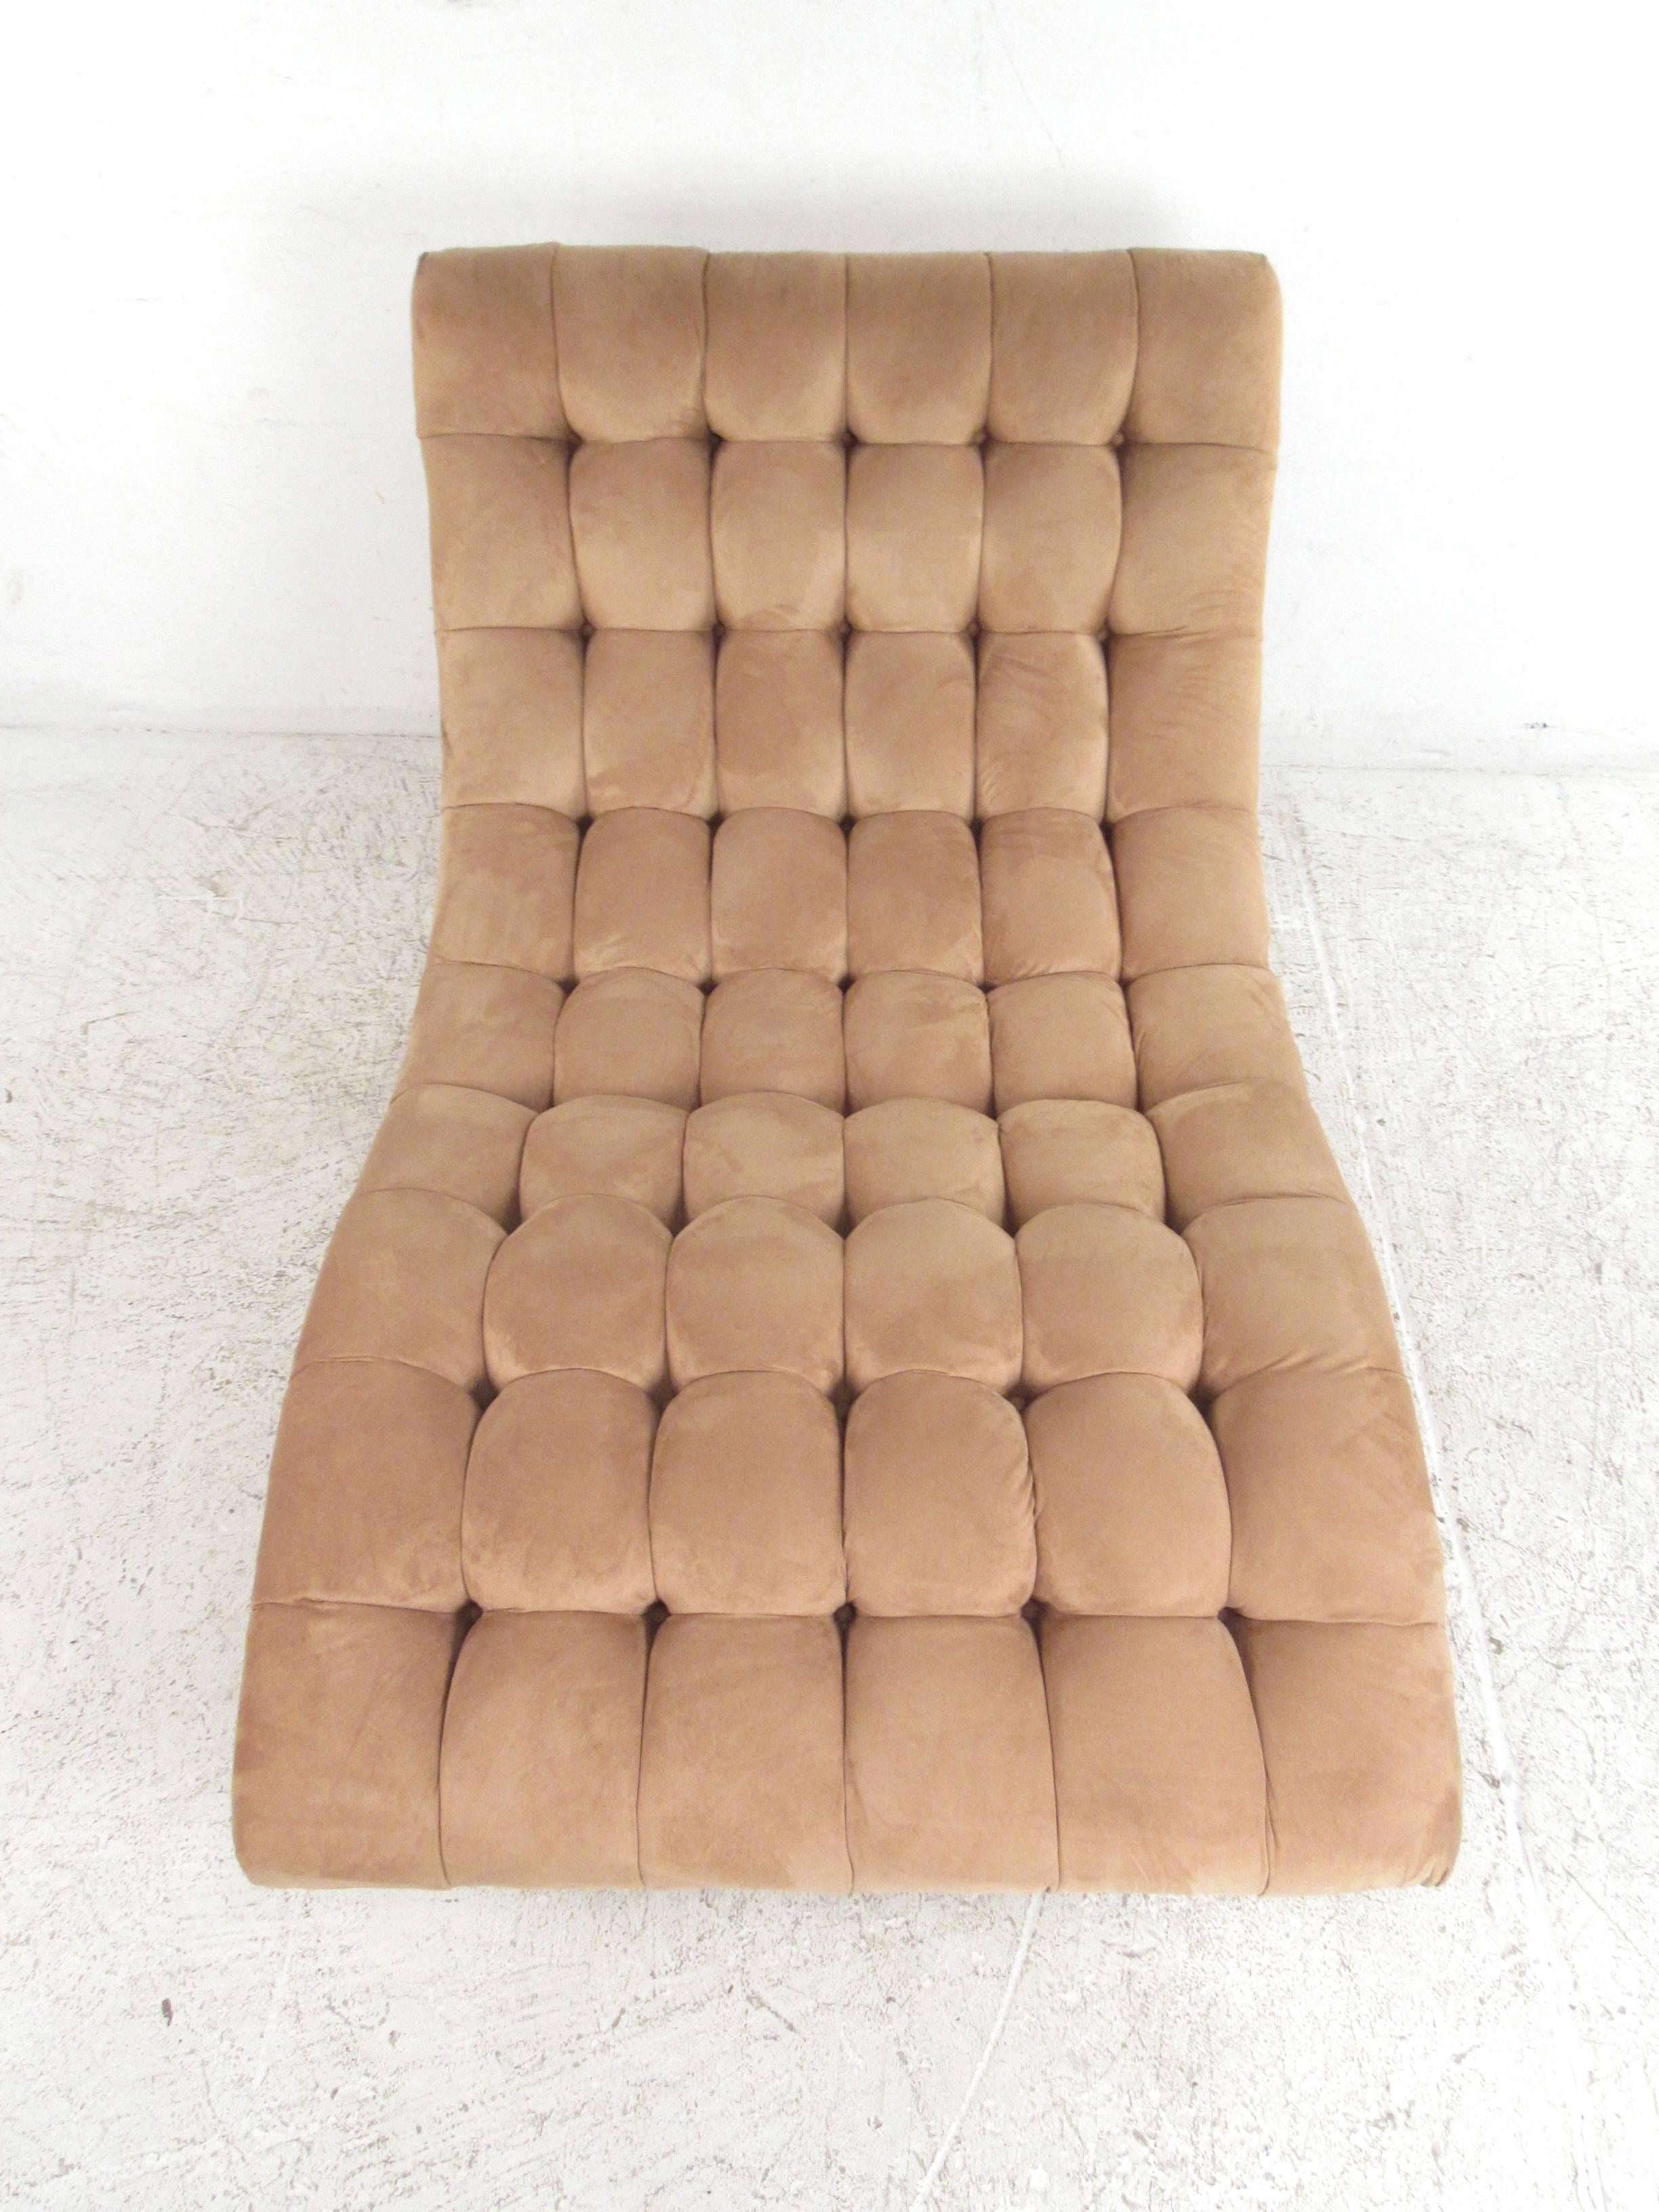 This tufted vintage chaise lounge chair features a dramatic sculptural shape, with impressive tufted upholstery. This mix of mid-century style and comfort makes this a fantastic addition to any seating layout in a variety of interiors. Please